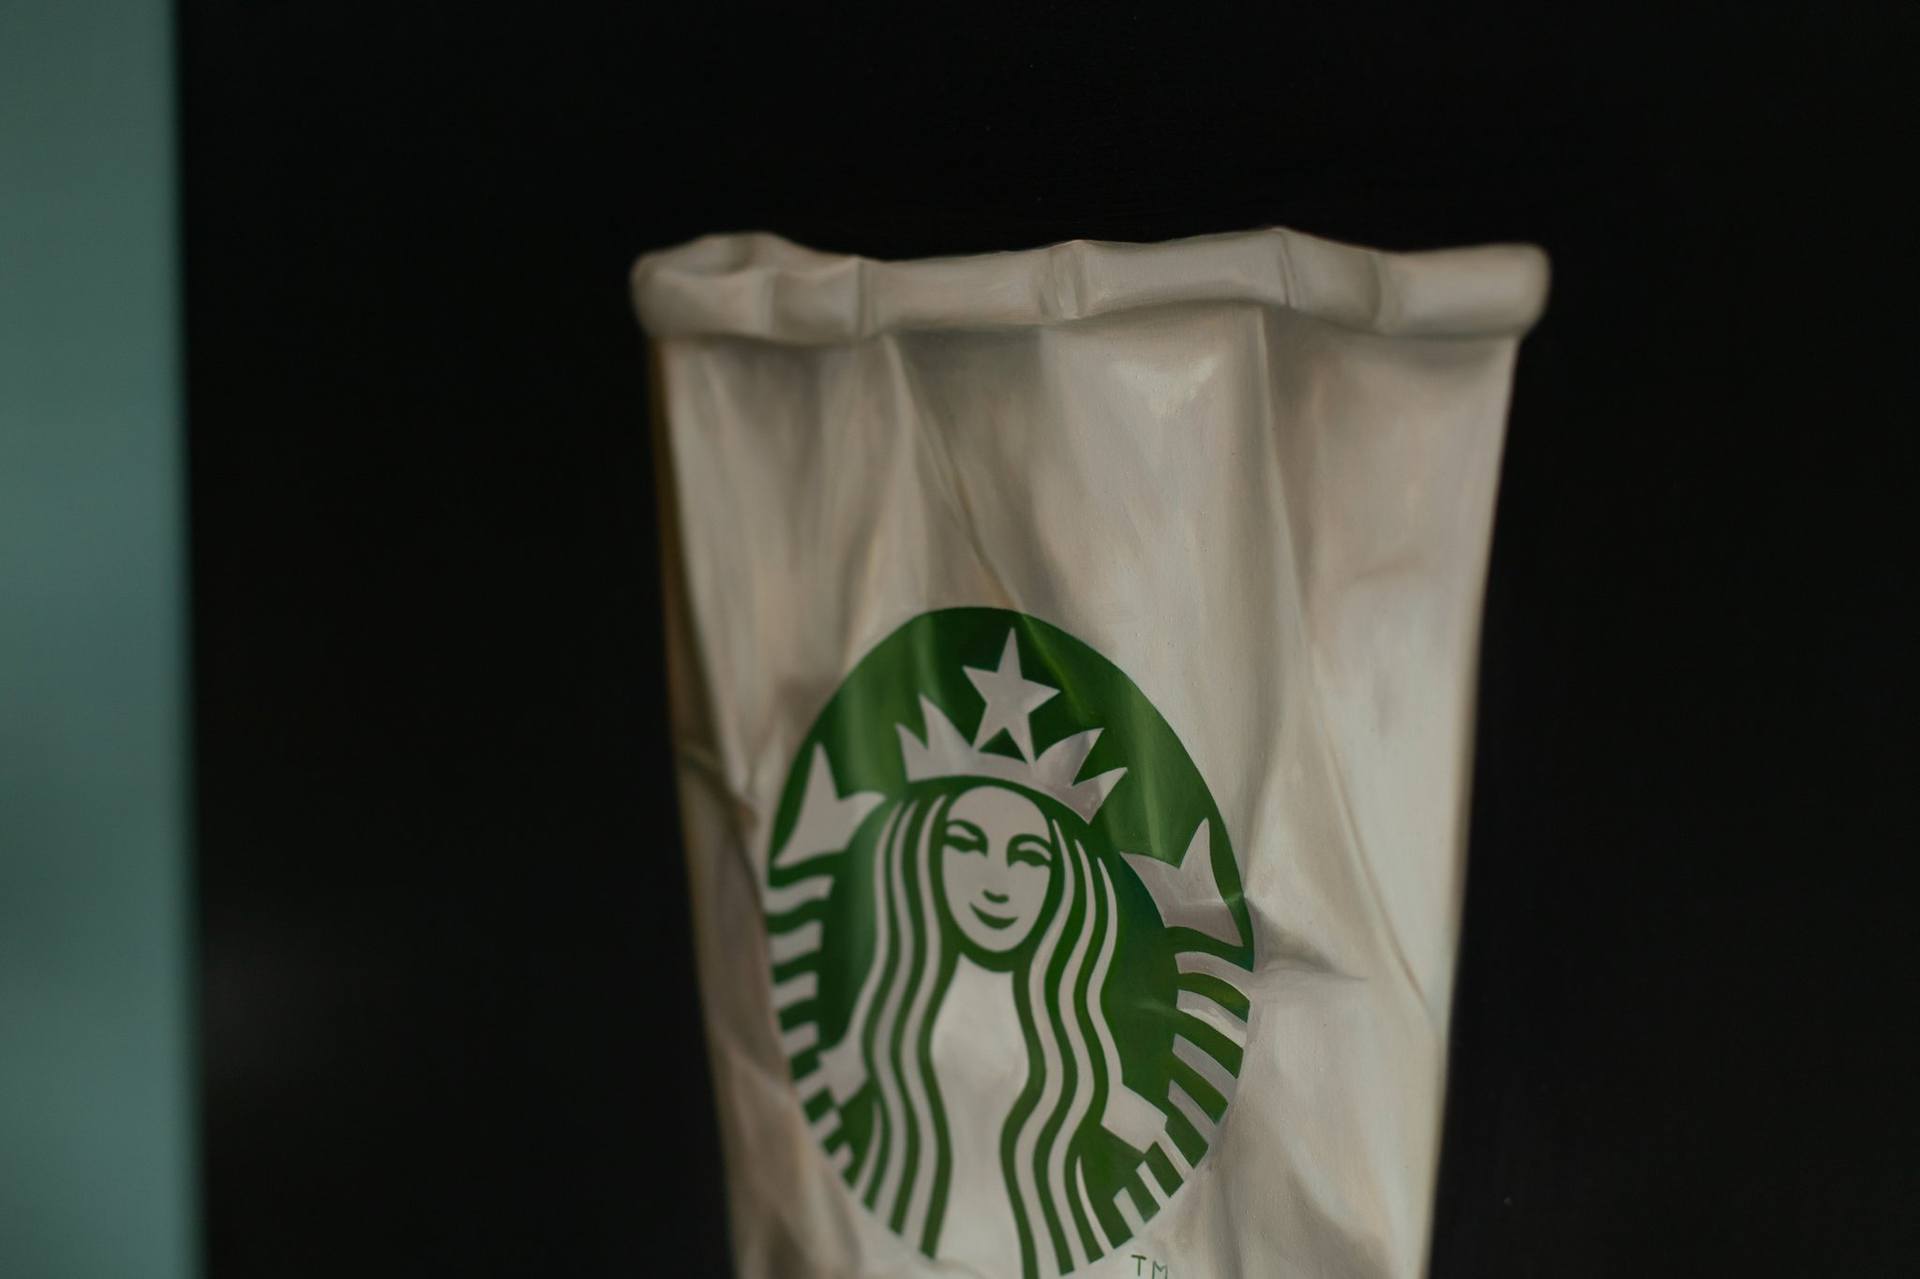 Crumpled Starbucks paper cup Painting by Gennaro Santaniello